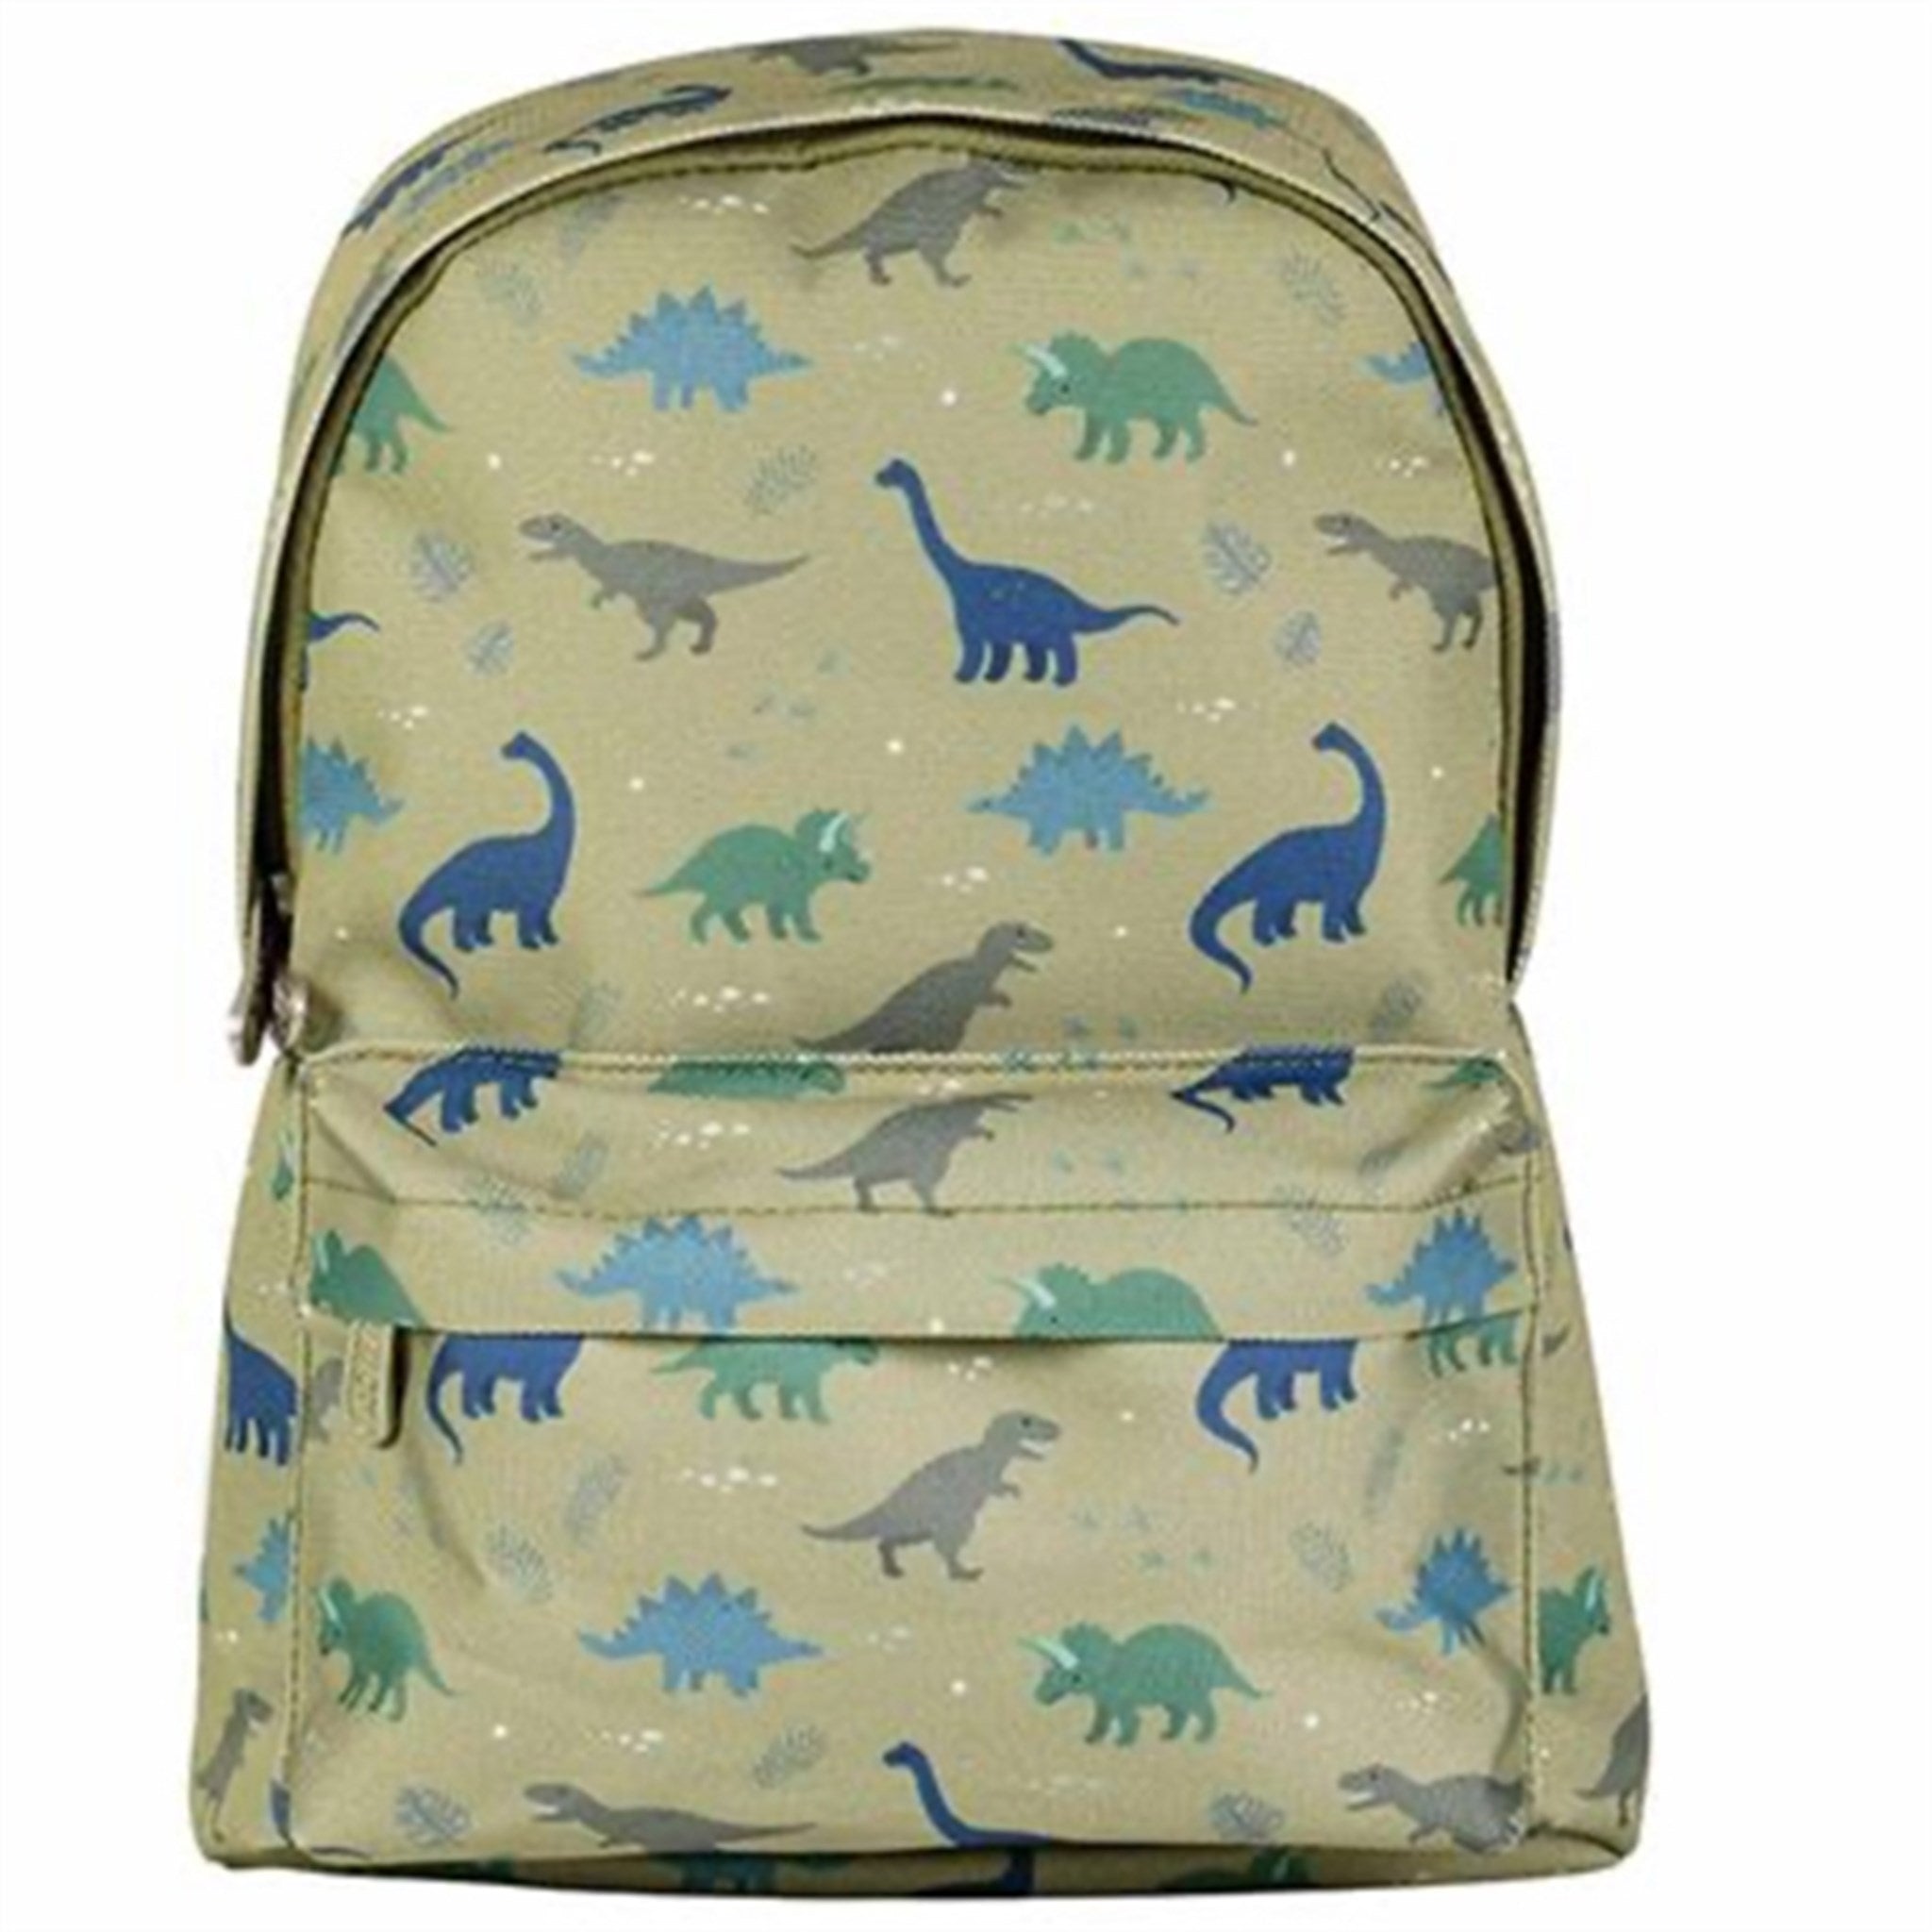 A Little Lovely Company Backpack Small Dinosaur